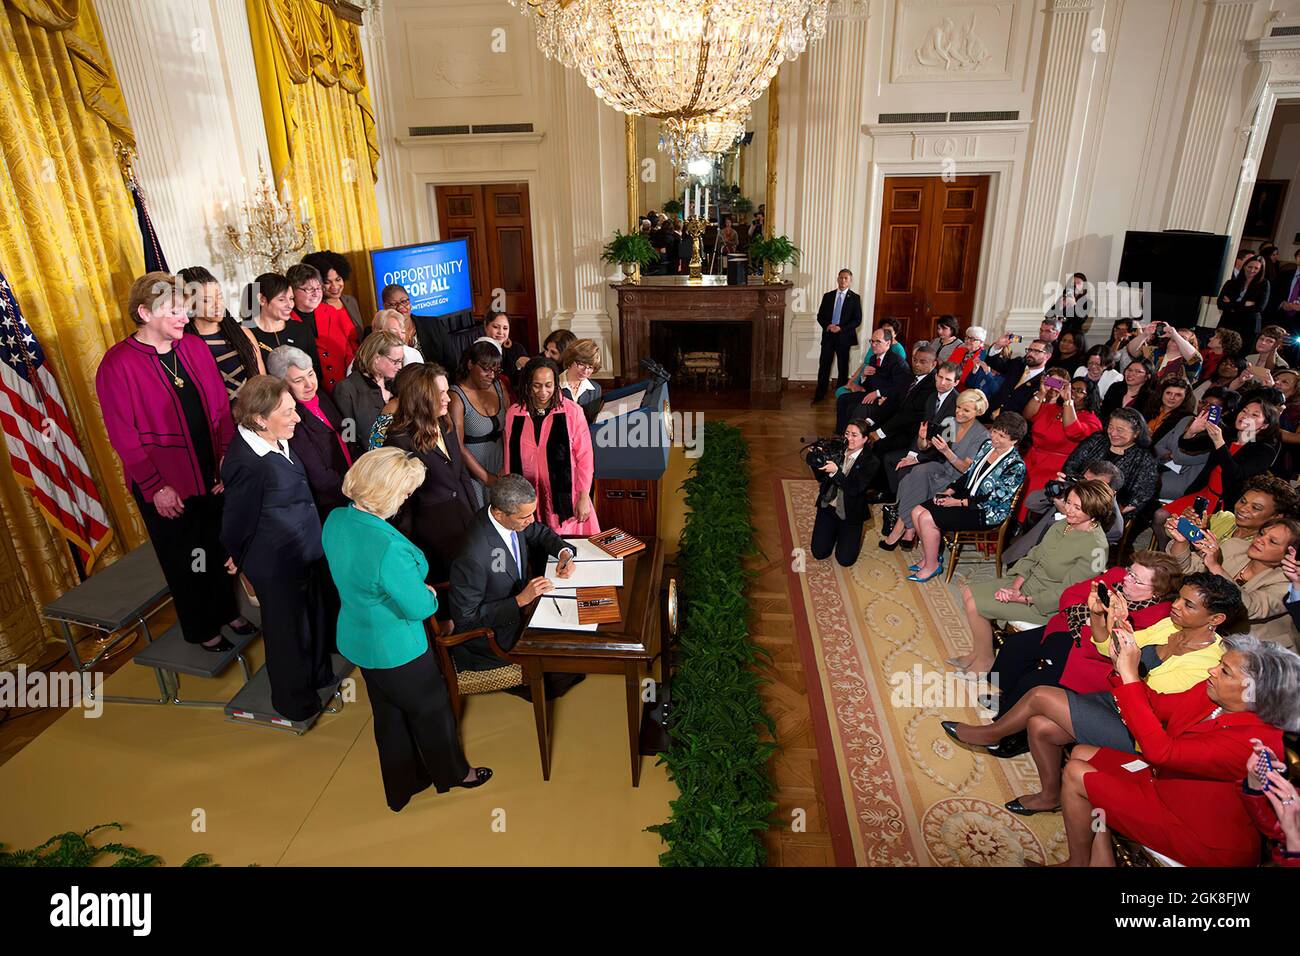 President Barack Obama signs executive actions to strengthen enforcement of equal pay laws for women, at an event marking Equal Pay Day in the East Room of the White House, April 8, 2014. The President signs the Presidential Memorandum -- Advancing Pay Equality Through Compensation Data Collection, and an Executive Order regarding Non-Retaliation for Disclosure of Compensation Information. Lilly Ledbetter stands to the left of the signing table. (Official White House Photo by Chuck Kennedy)  This official White House photograph is being made available only for publication by news organizations Stock Photo